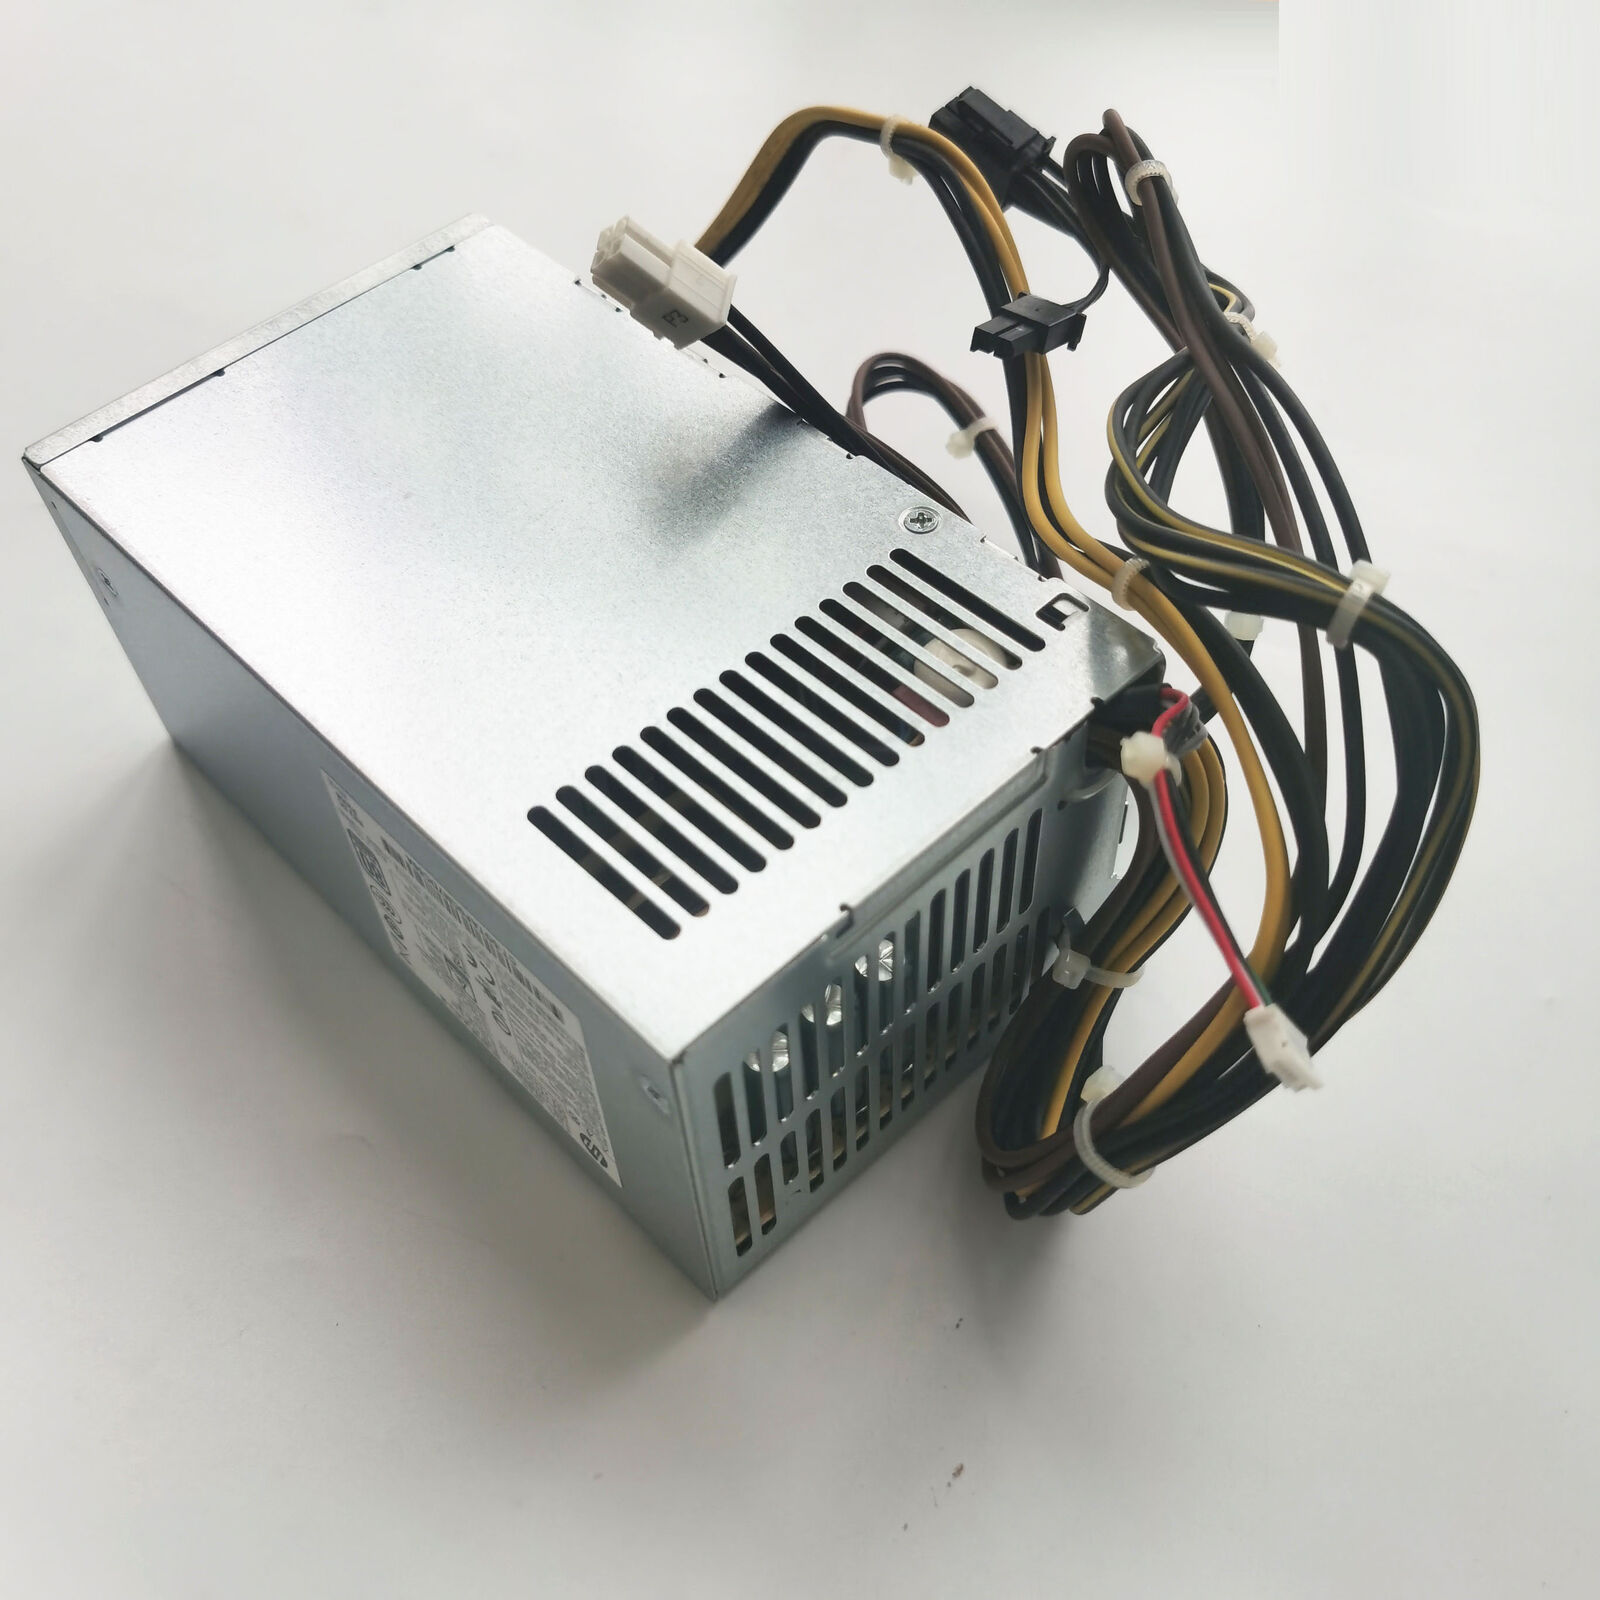 New PSU Power Supply For HP 400W L69242-800 US